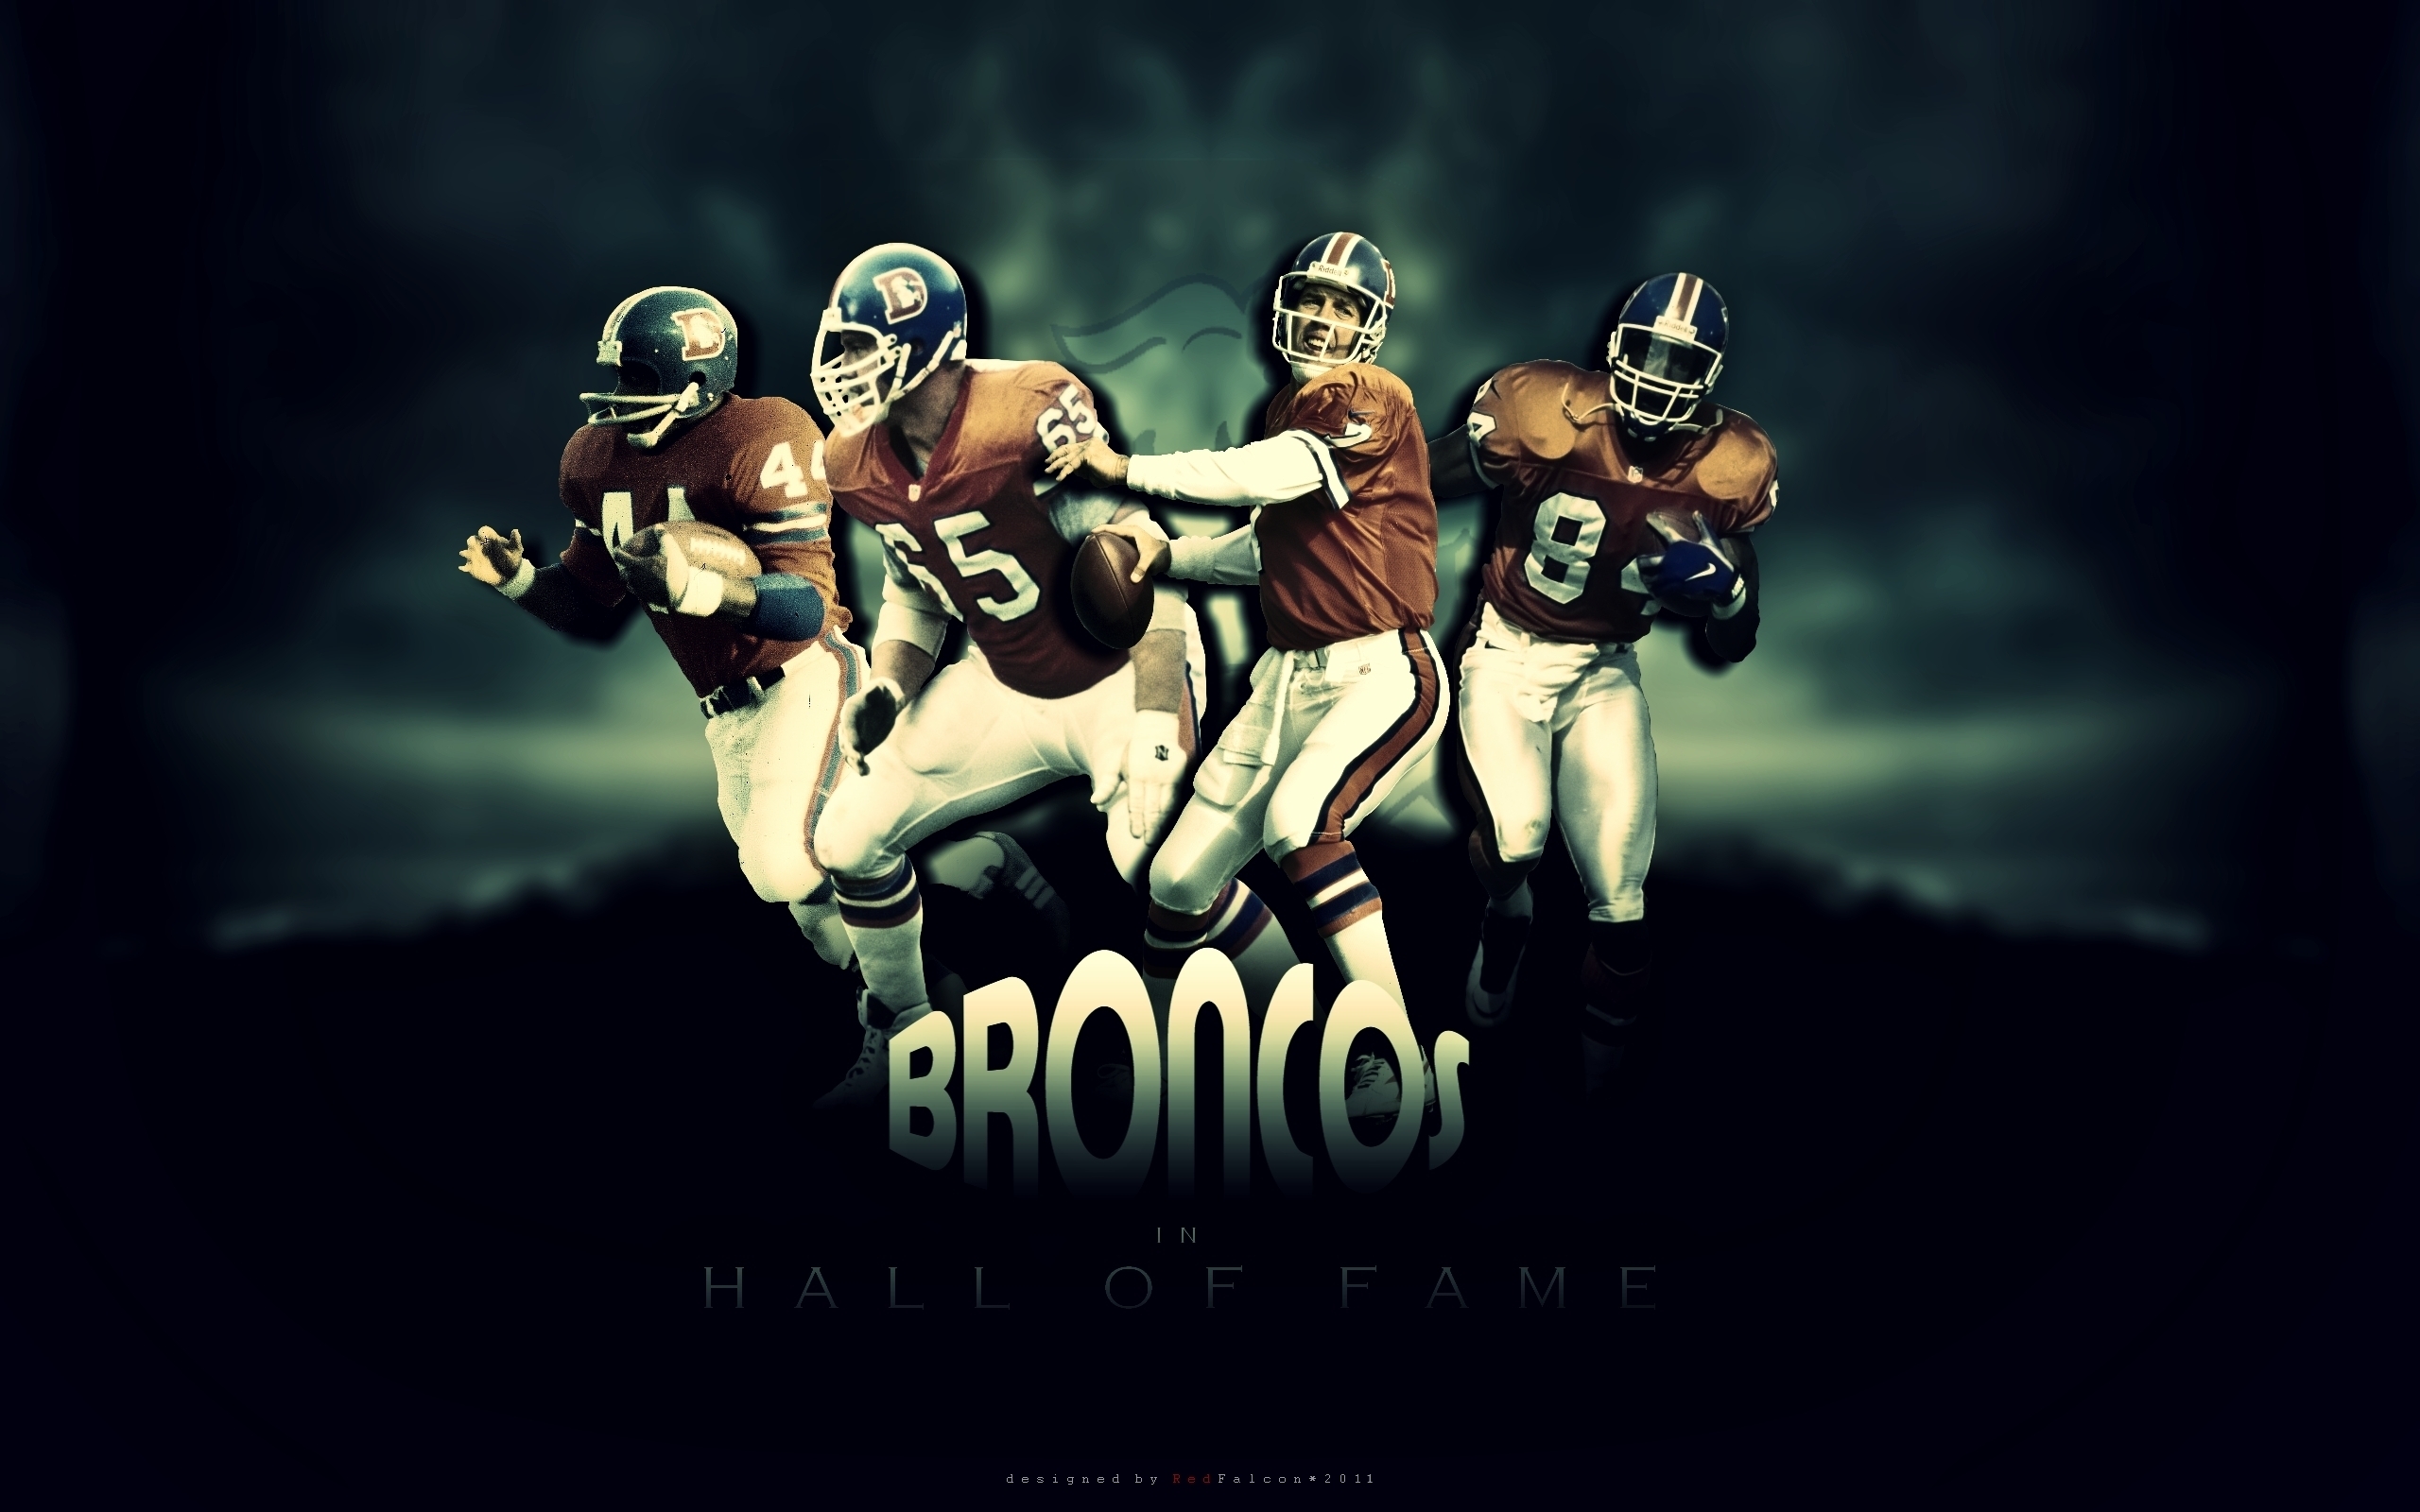 Broncos Hall of Fame for 2560 x 1600 widescreen resolution